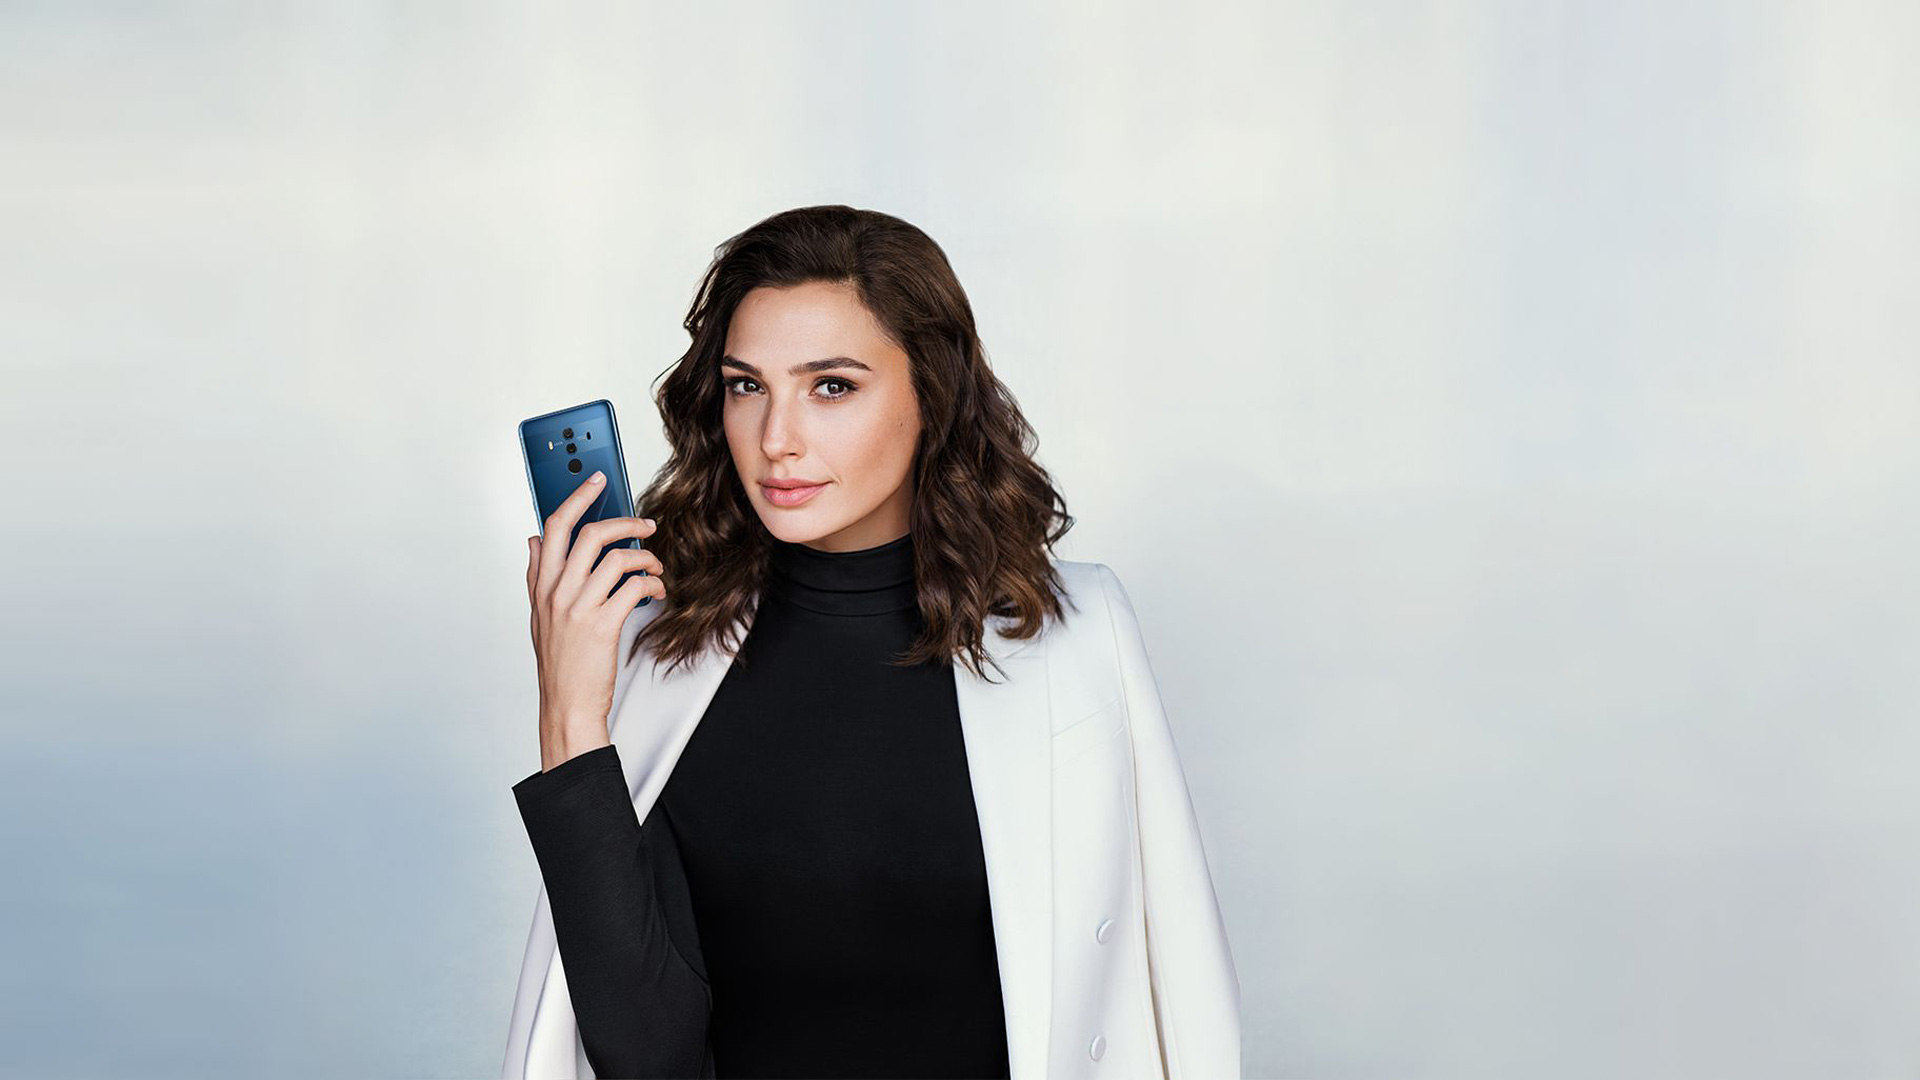 Free photo Gal Gadot was photographed with a phone